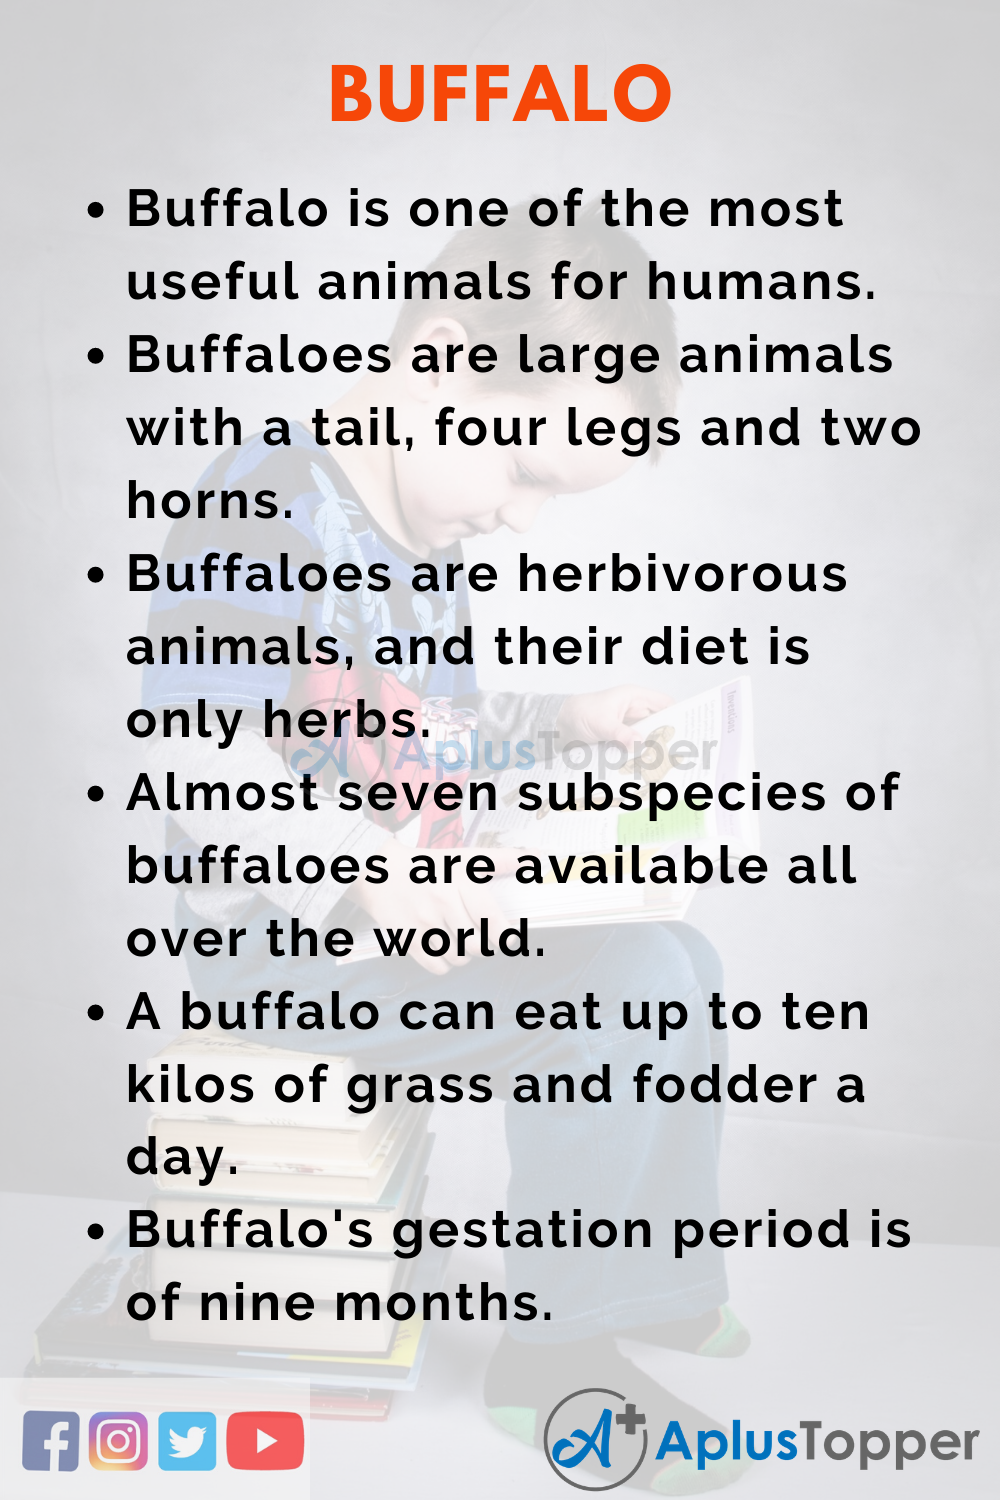 10 Lines on Buffalo for Kids